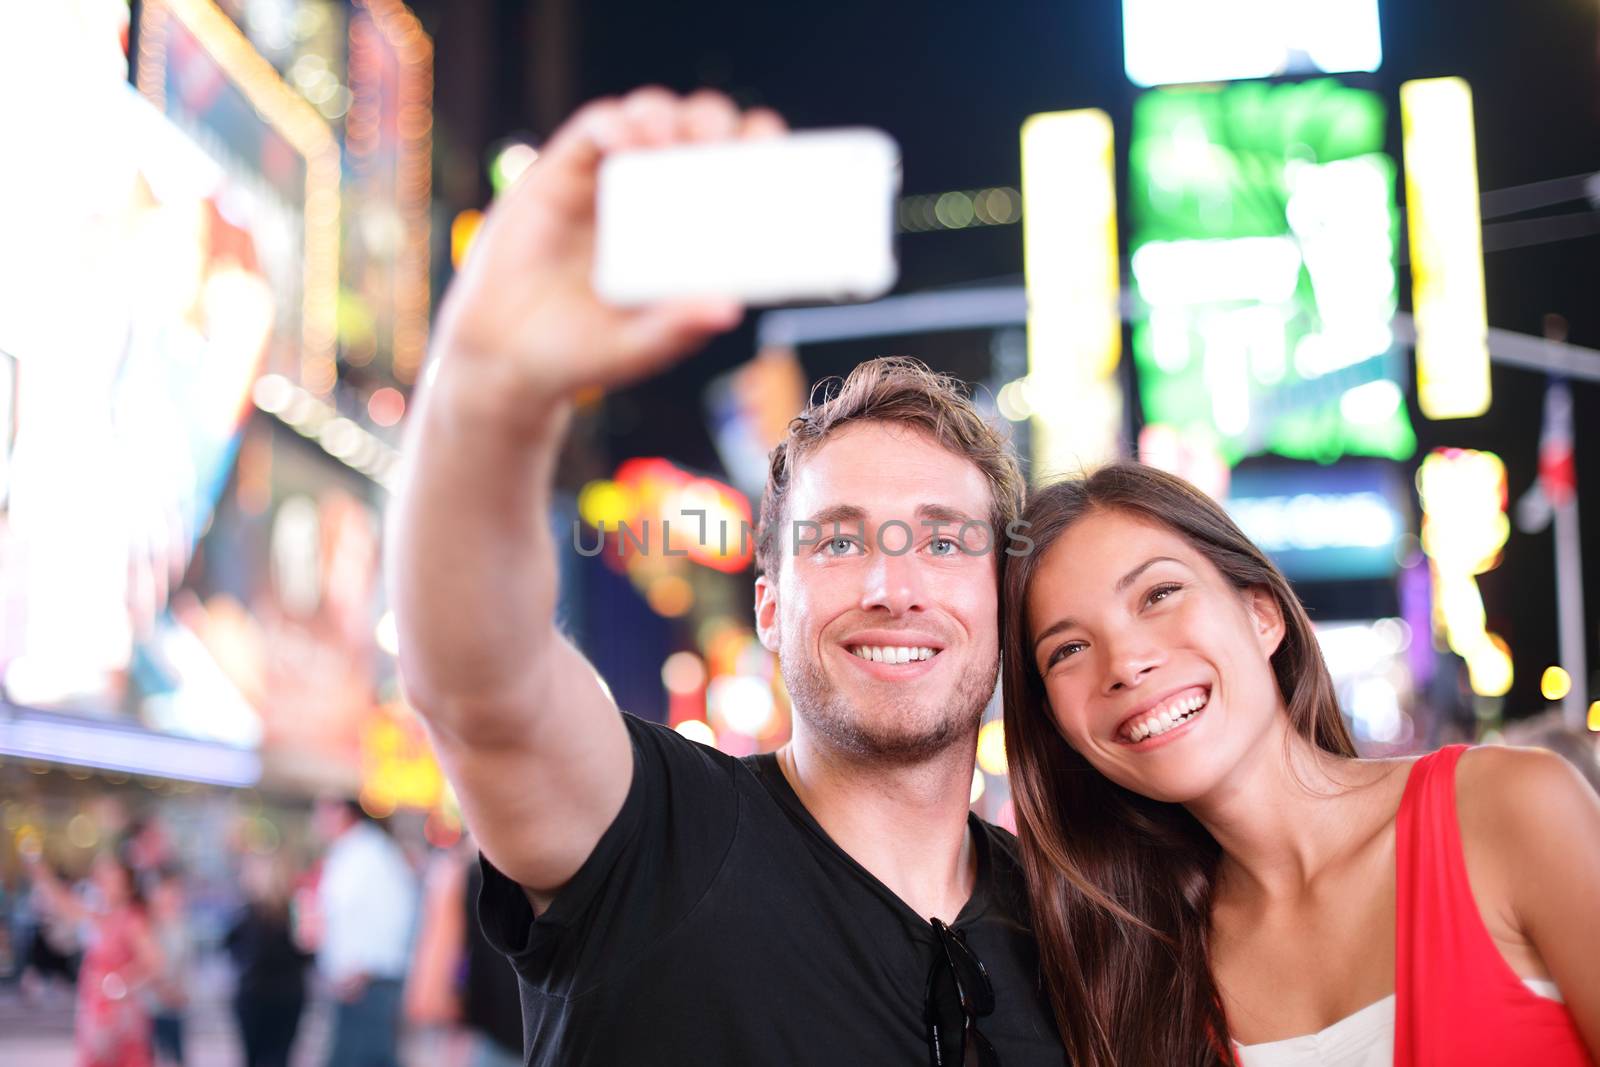 Dating young couple happy in love taking selfie photo on Times Square, New York by Maridav